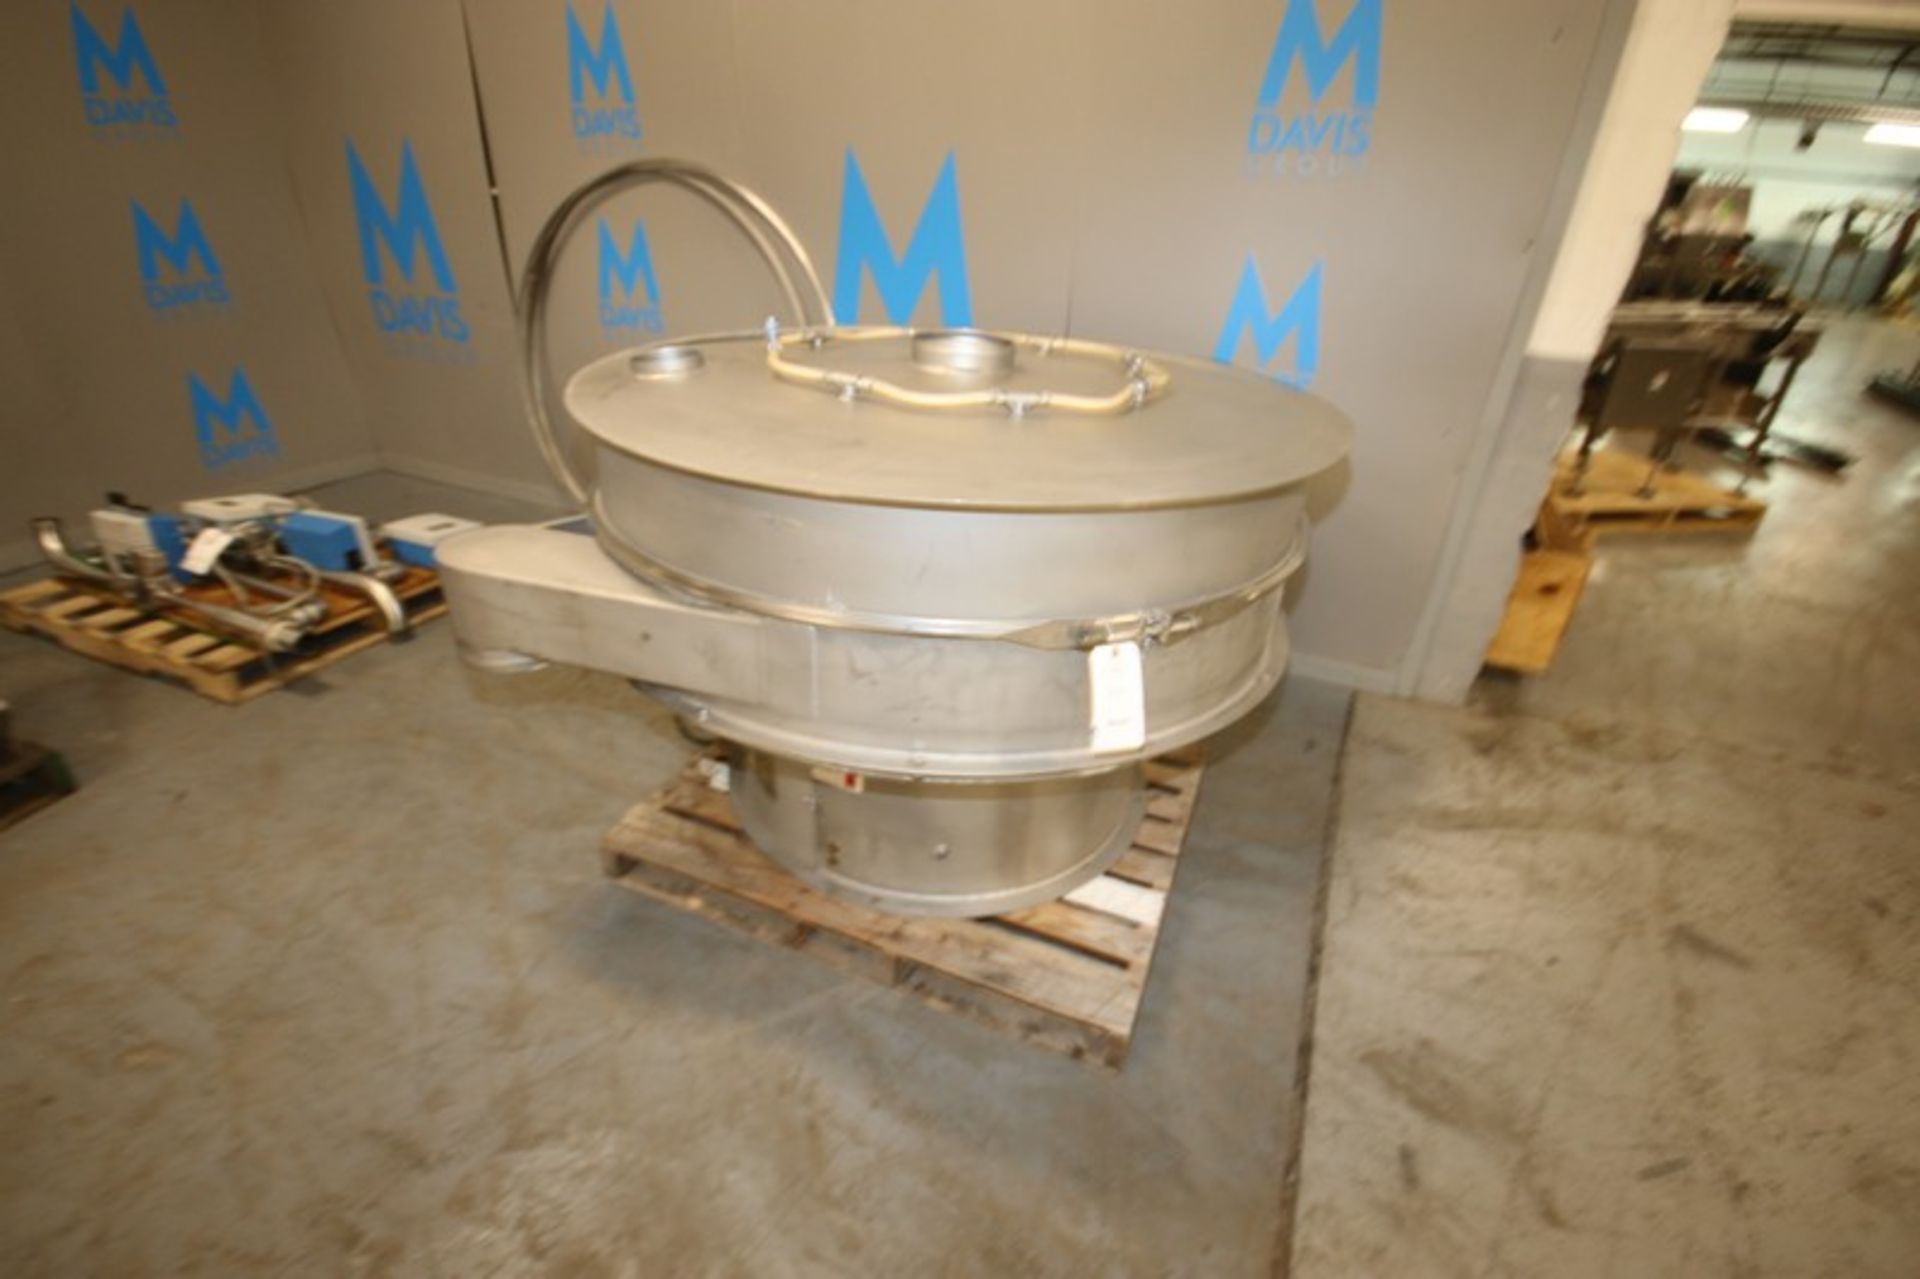 Midwestern Industries 60" S/S Vibratory Sifter,Model MR60S8-, S/N 1215-5044, 2.5 hp/1200rpm, 230/ - Image 9 of 12